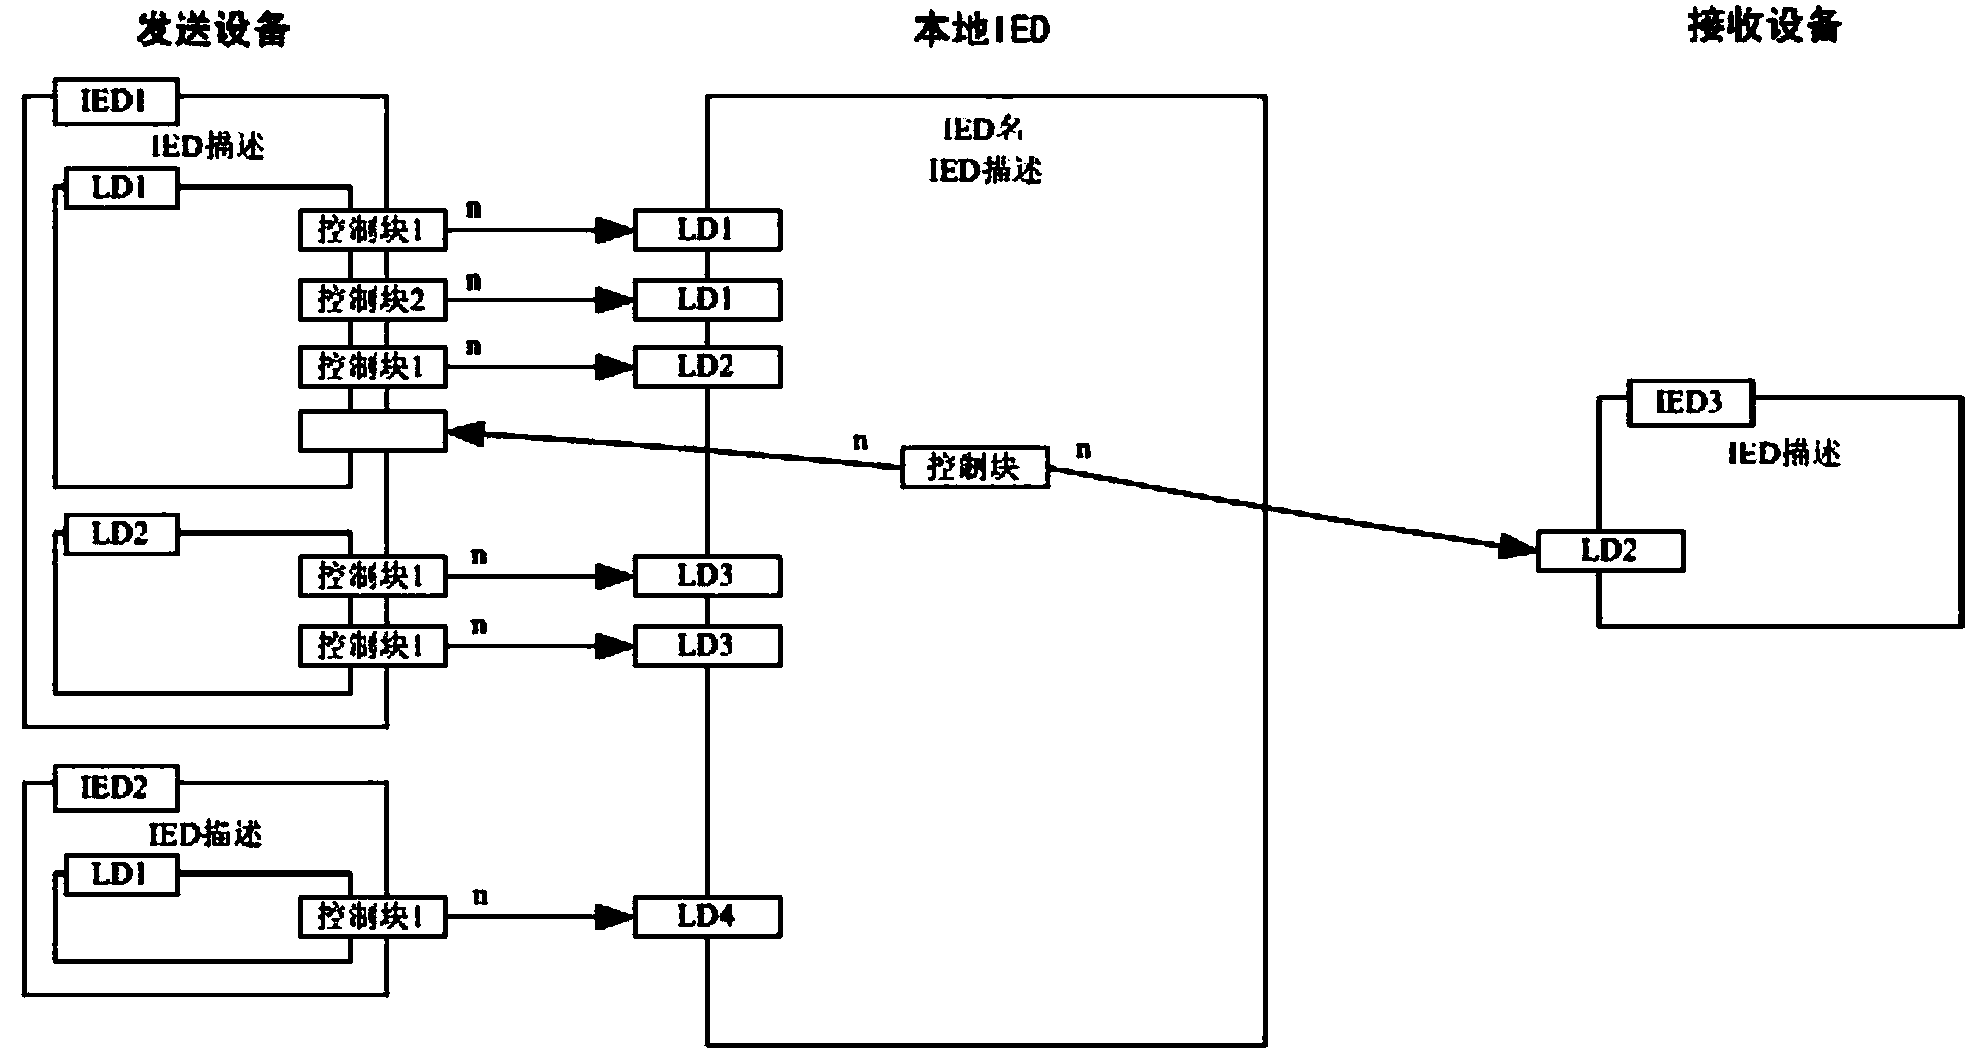 Multi-dimensional graphical display method based on virtual connection between all devices of smart substation SCD